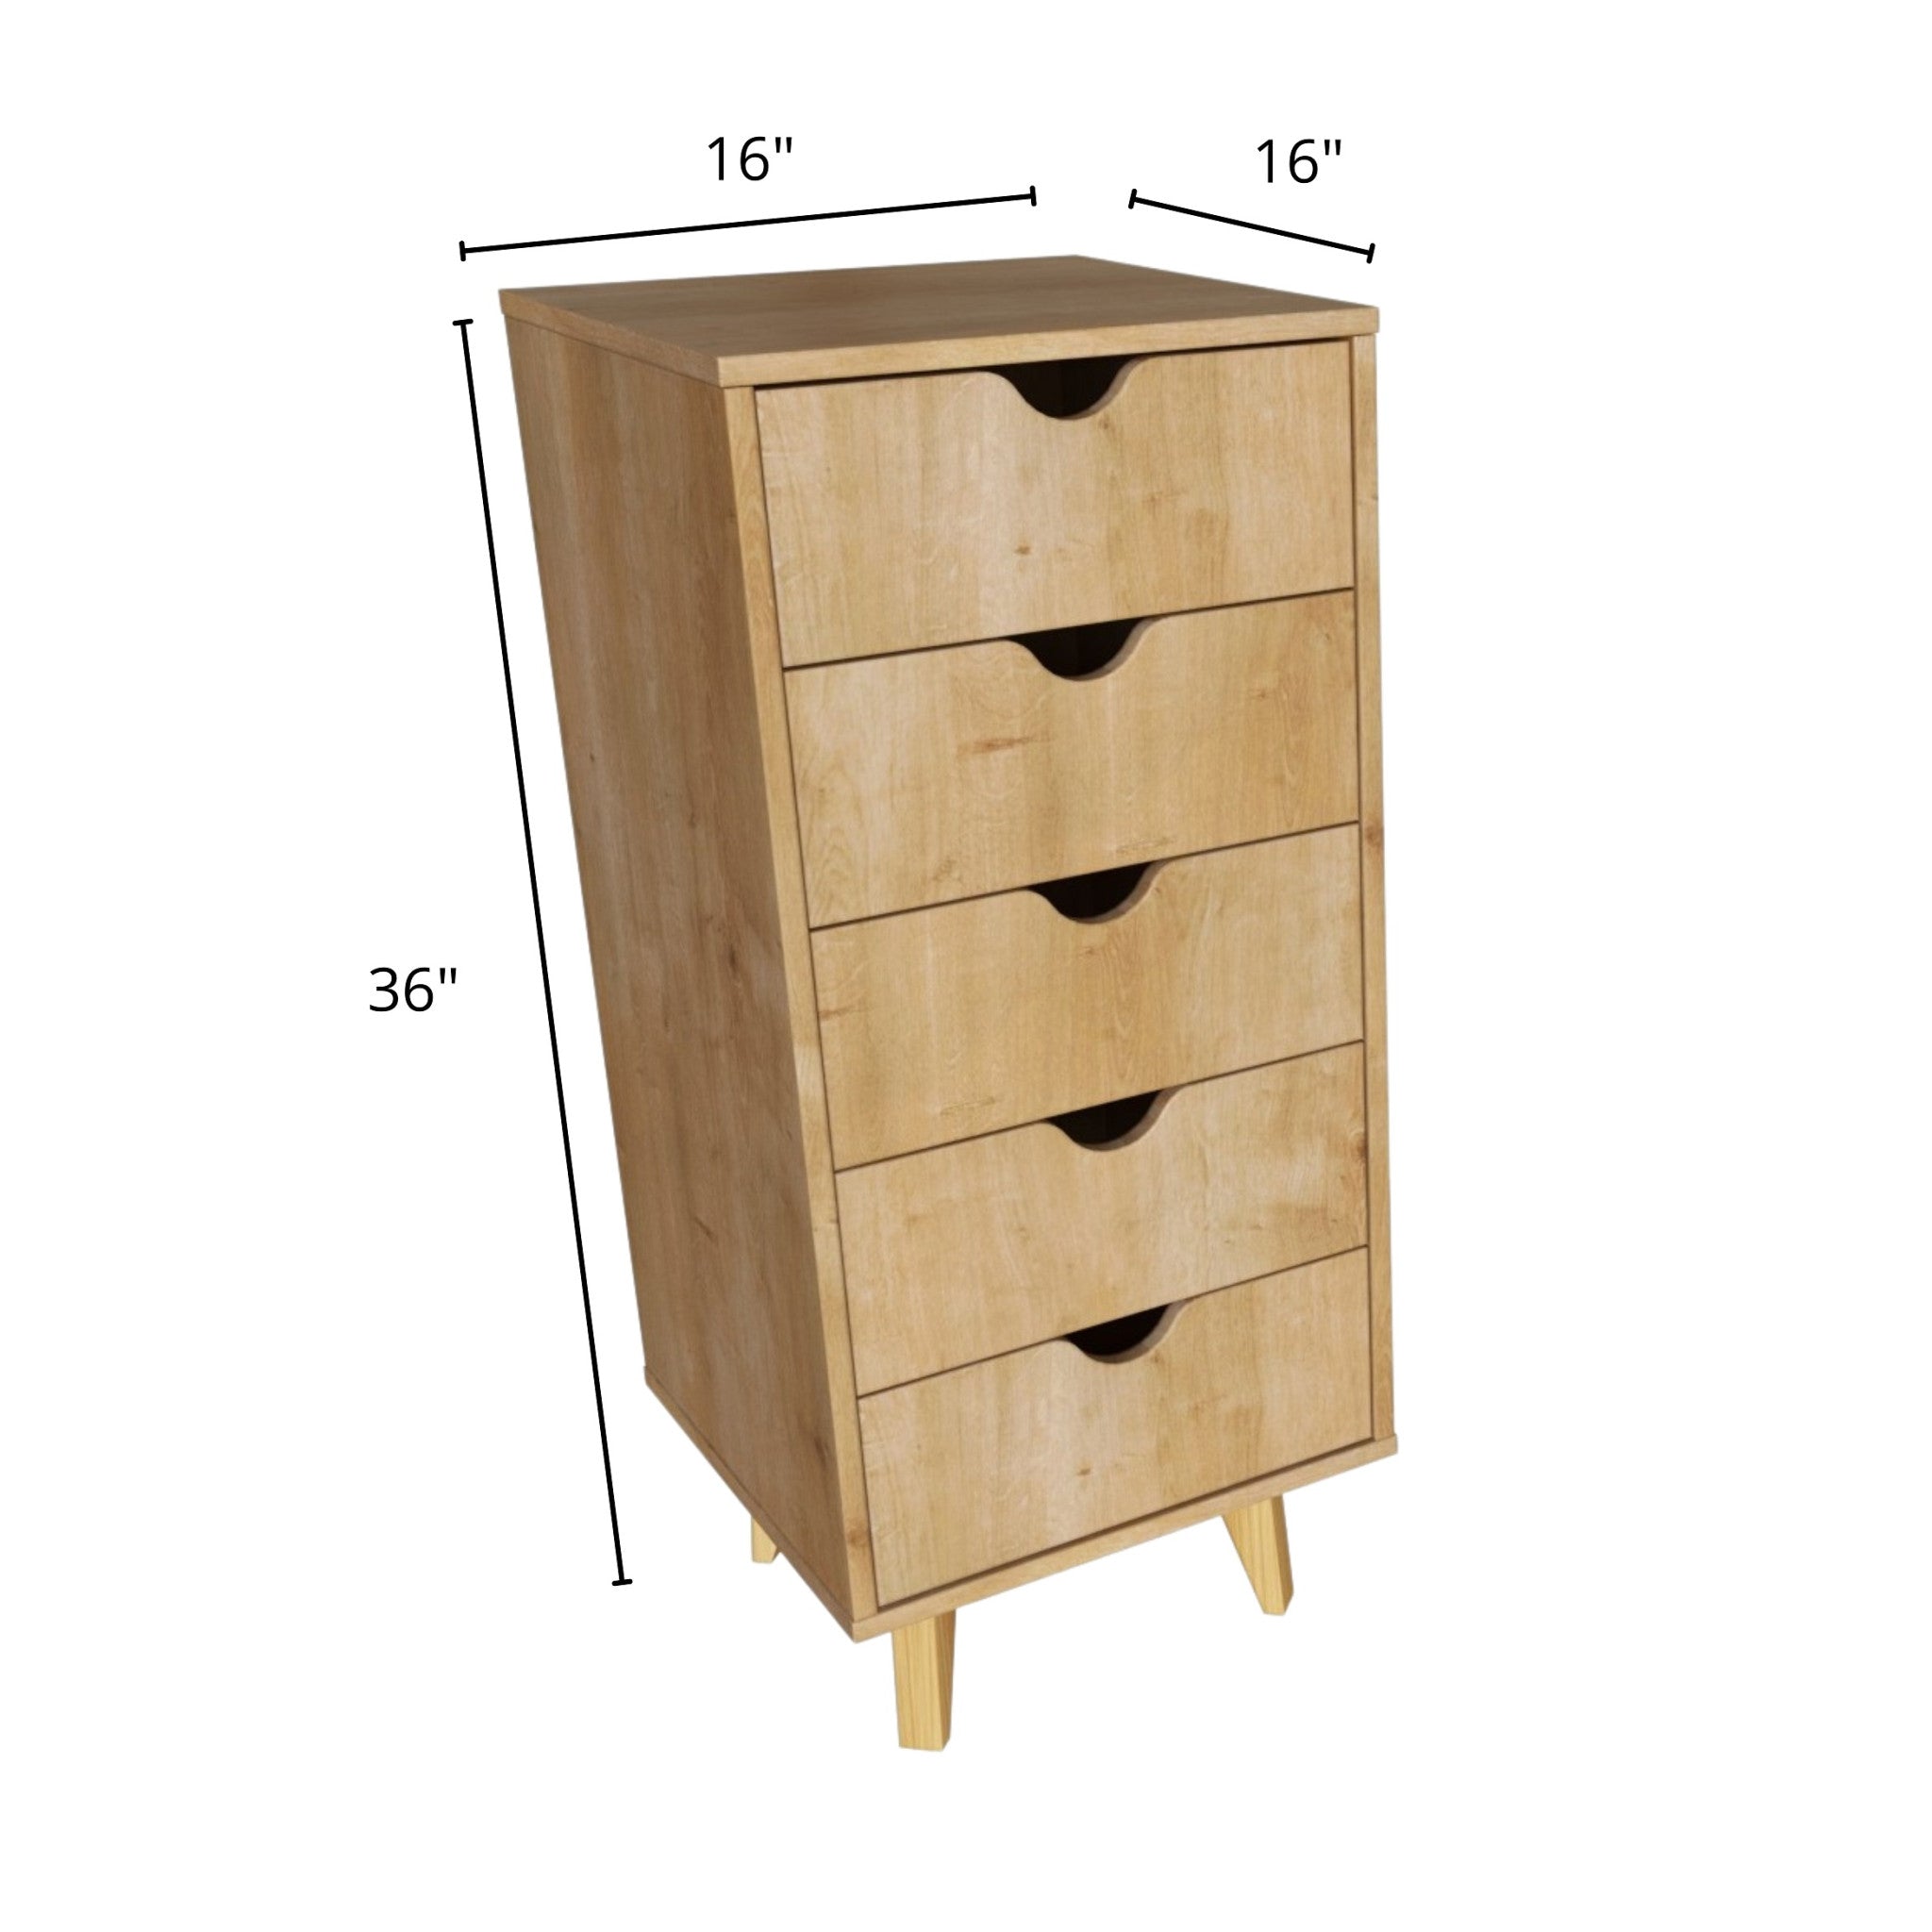 16" Natural Solid Wood Five Drawer Lingerie Chest